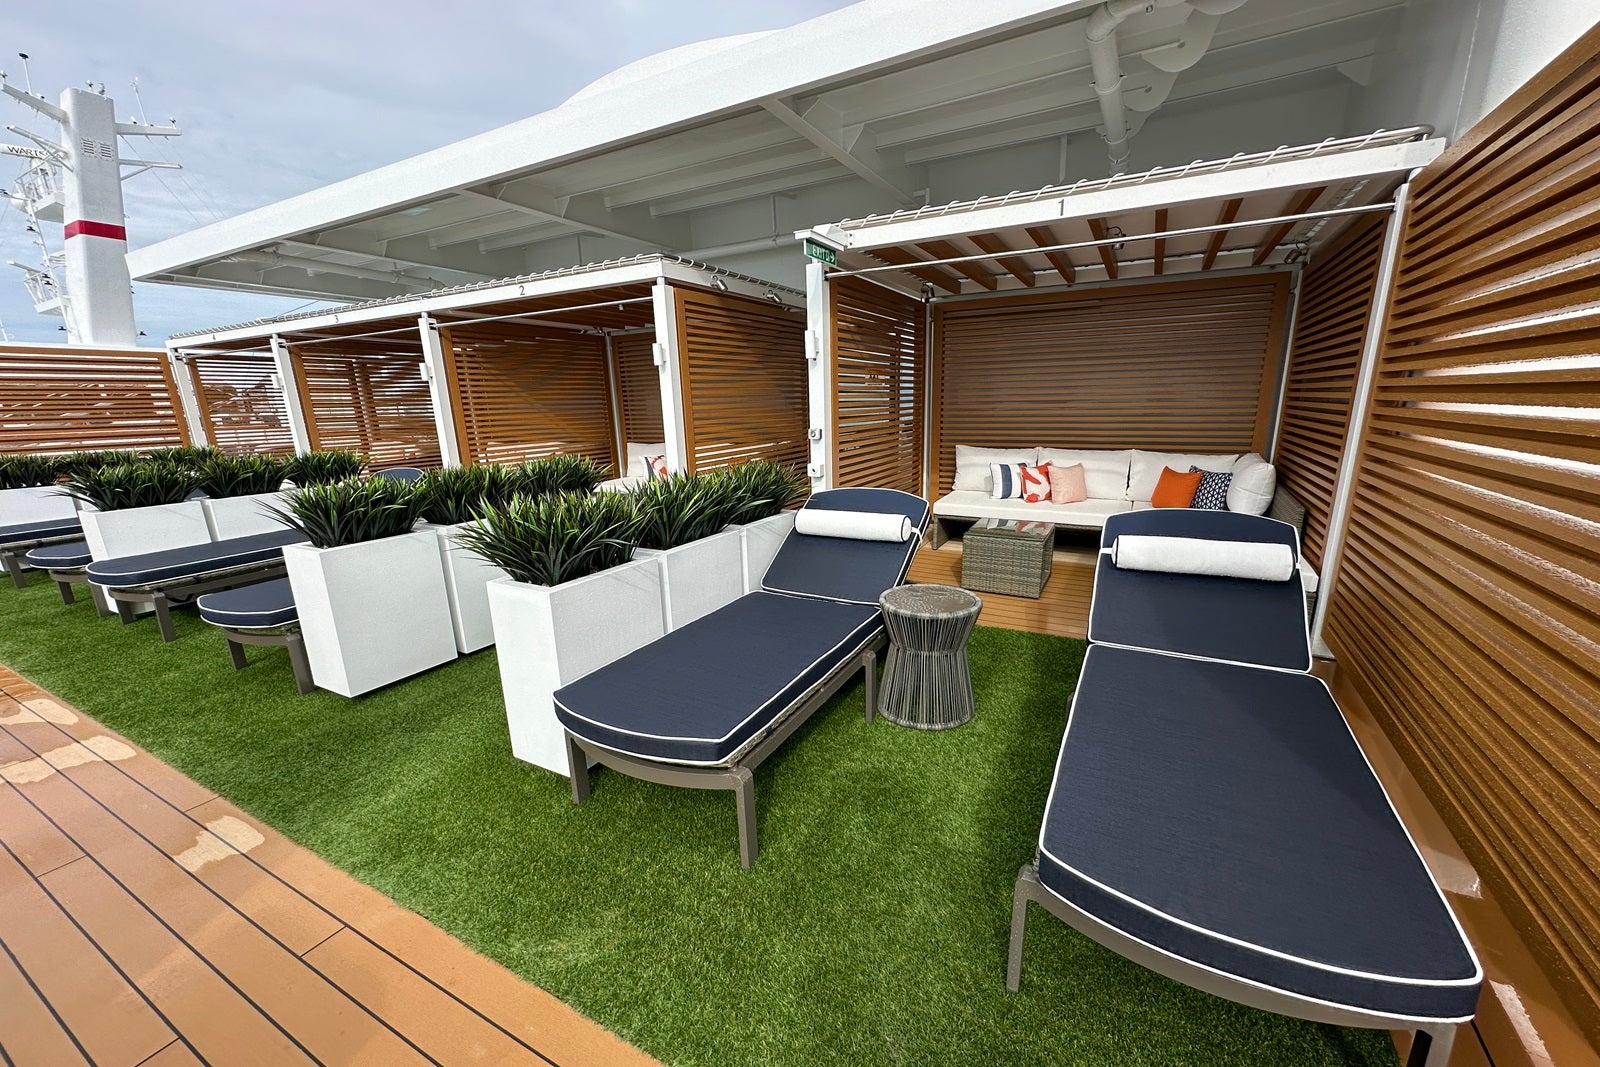 Cabanas on faux grass on a private cruise ship sun deck